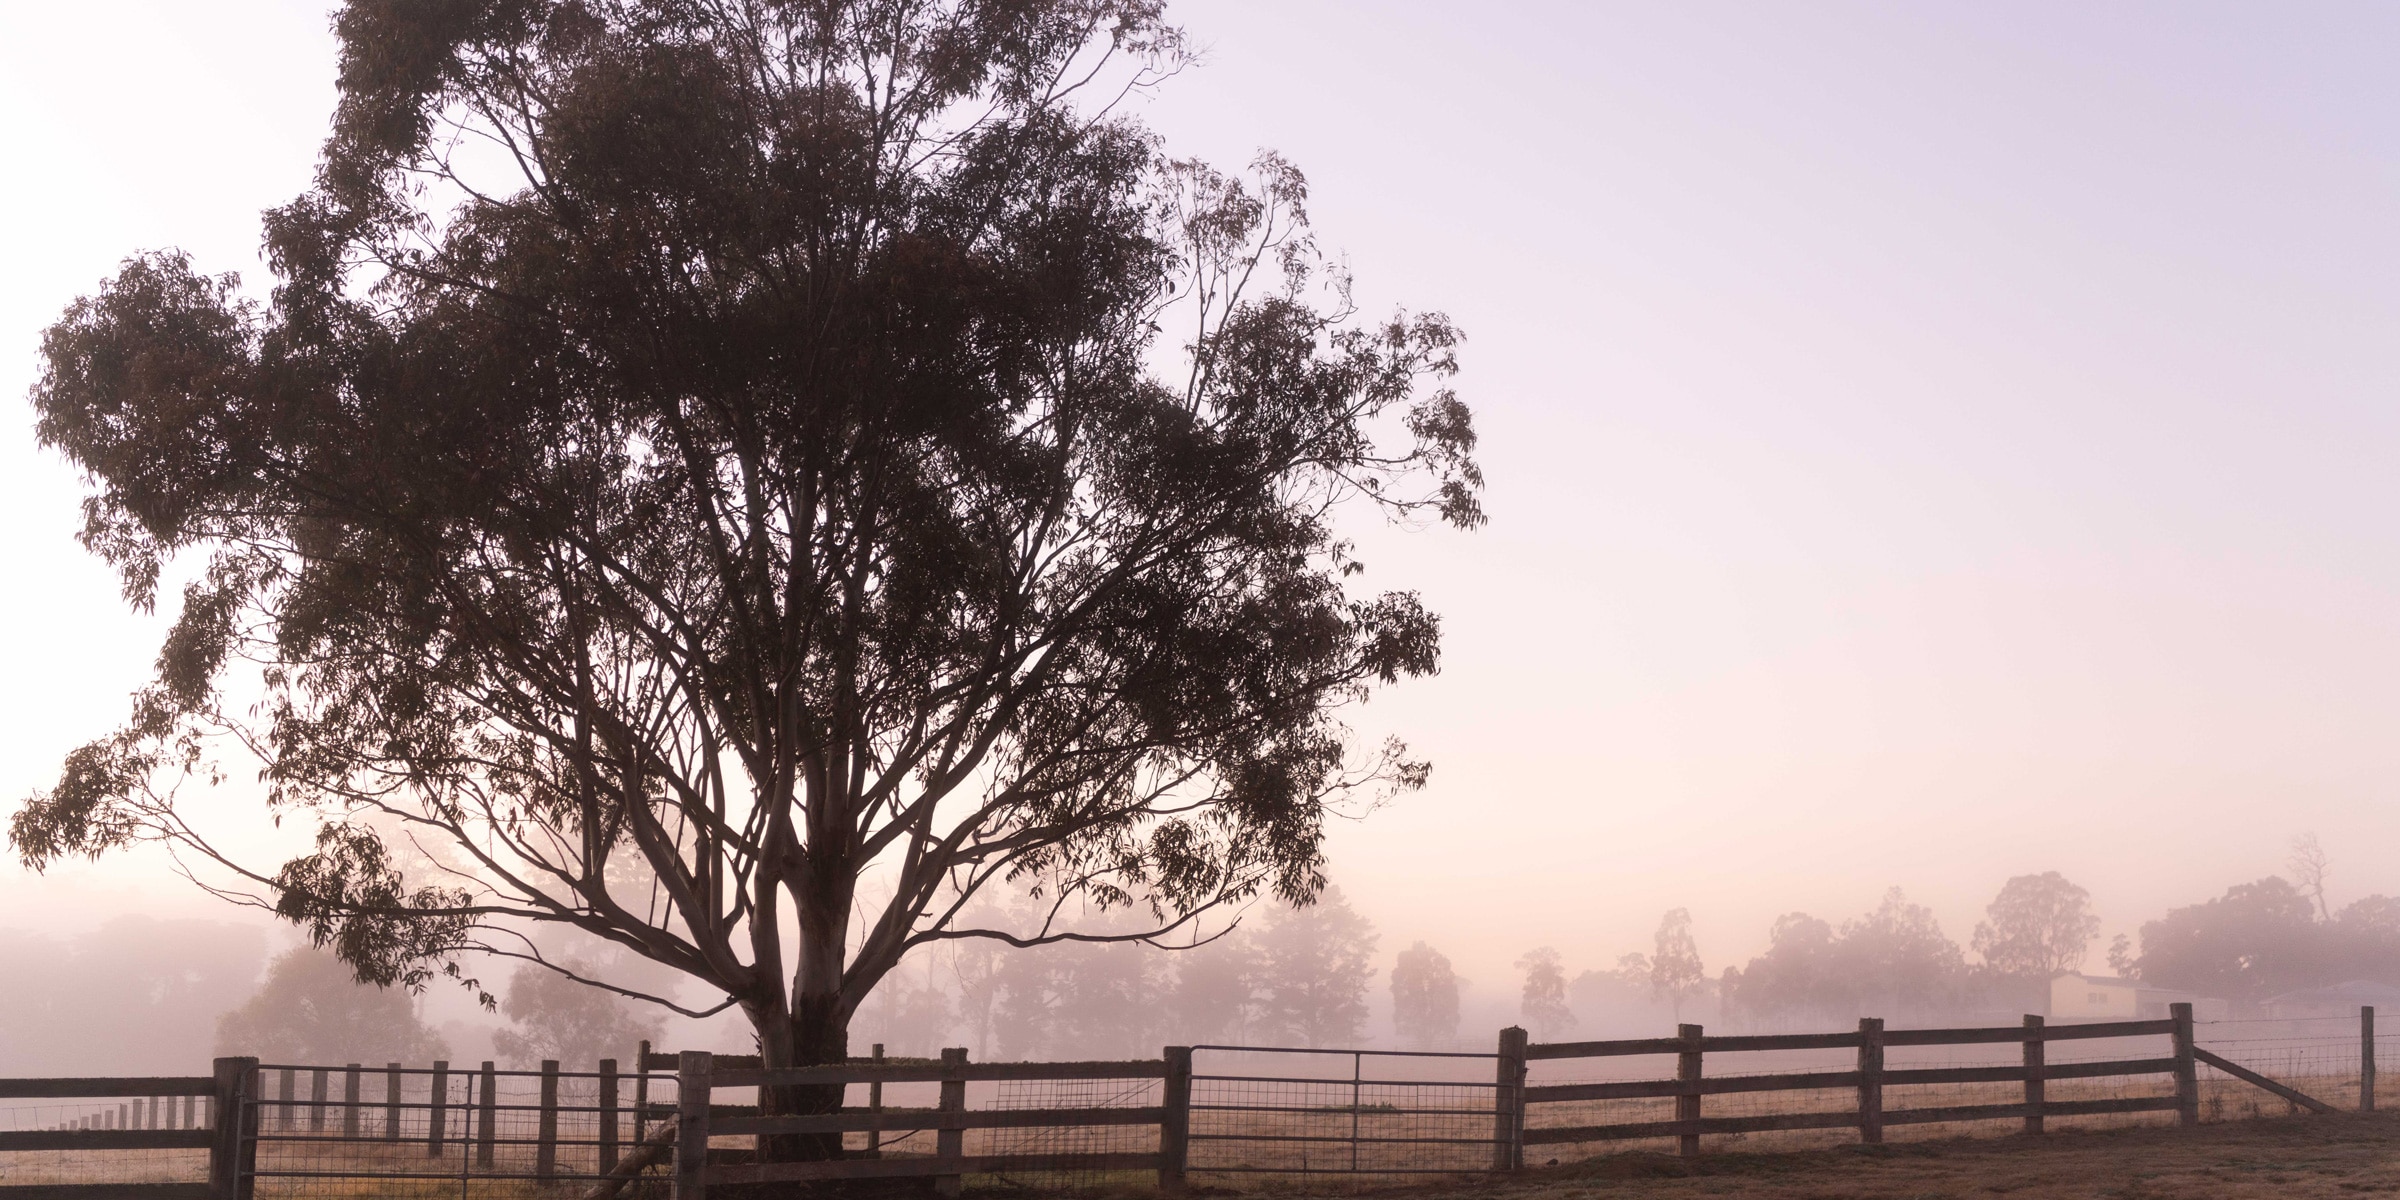 Landscape of paddock fence and tree on a hazy morning